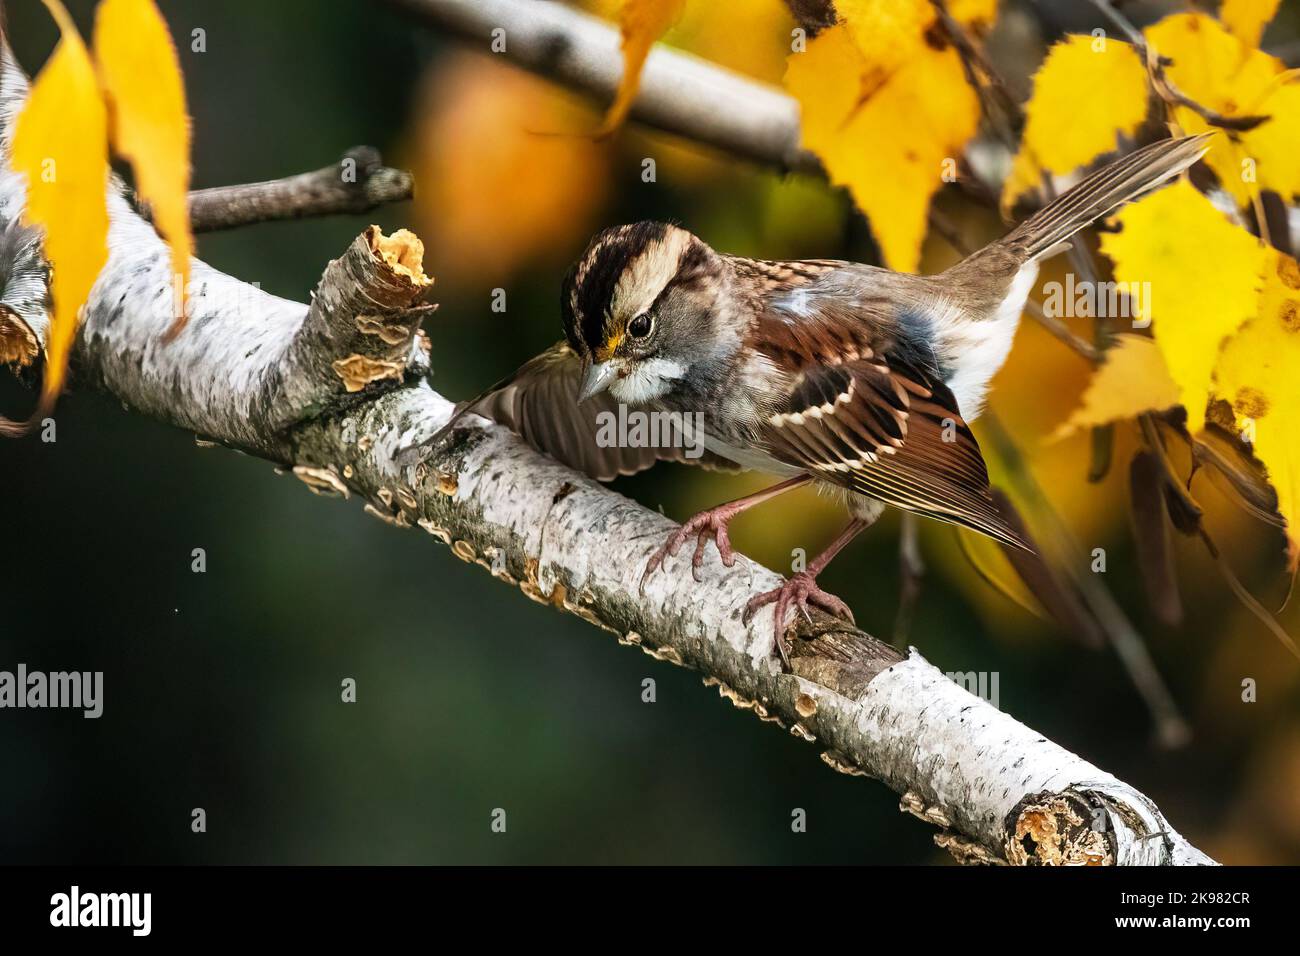 White-throated sparrow wing stretch in autumn foliage Stock Photo